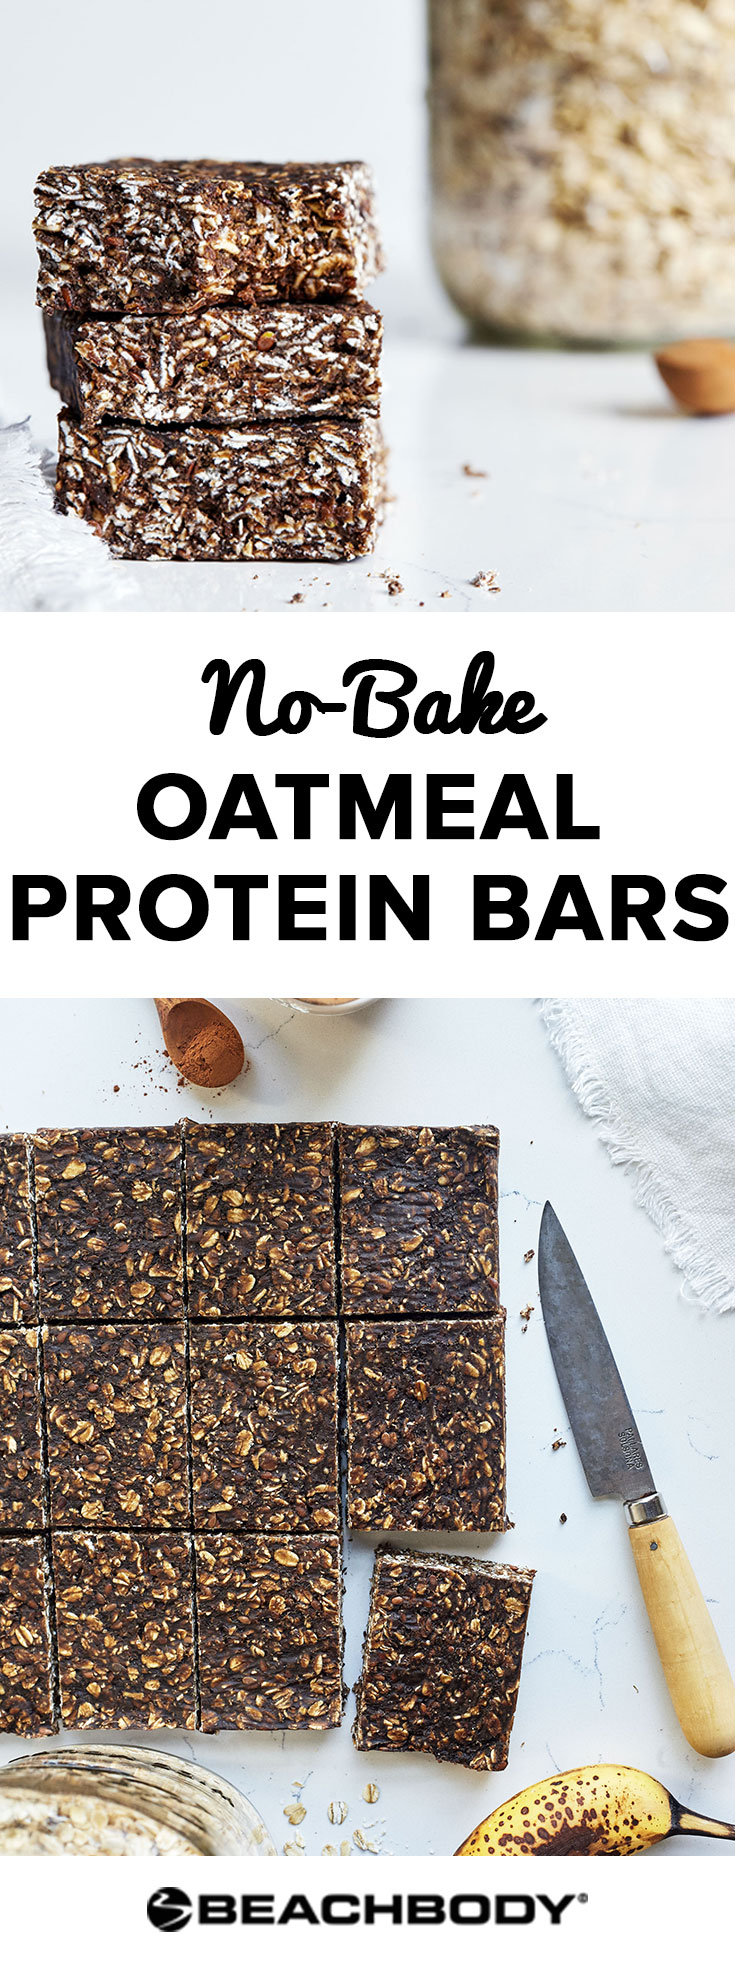 This No-Bake Oatmeal Protein Bars recipe is easy, delicious, and doesn't require any cooking. 